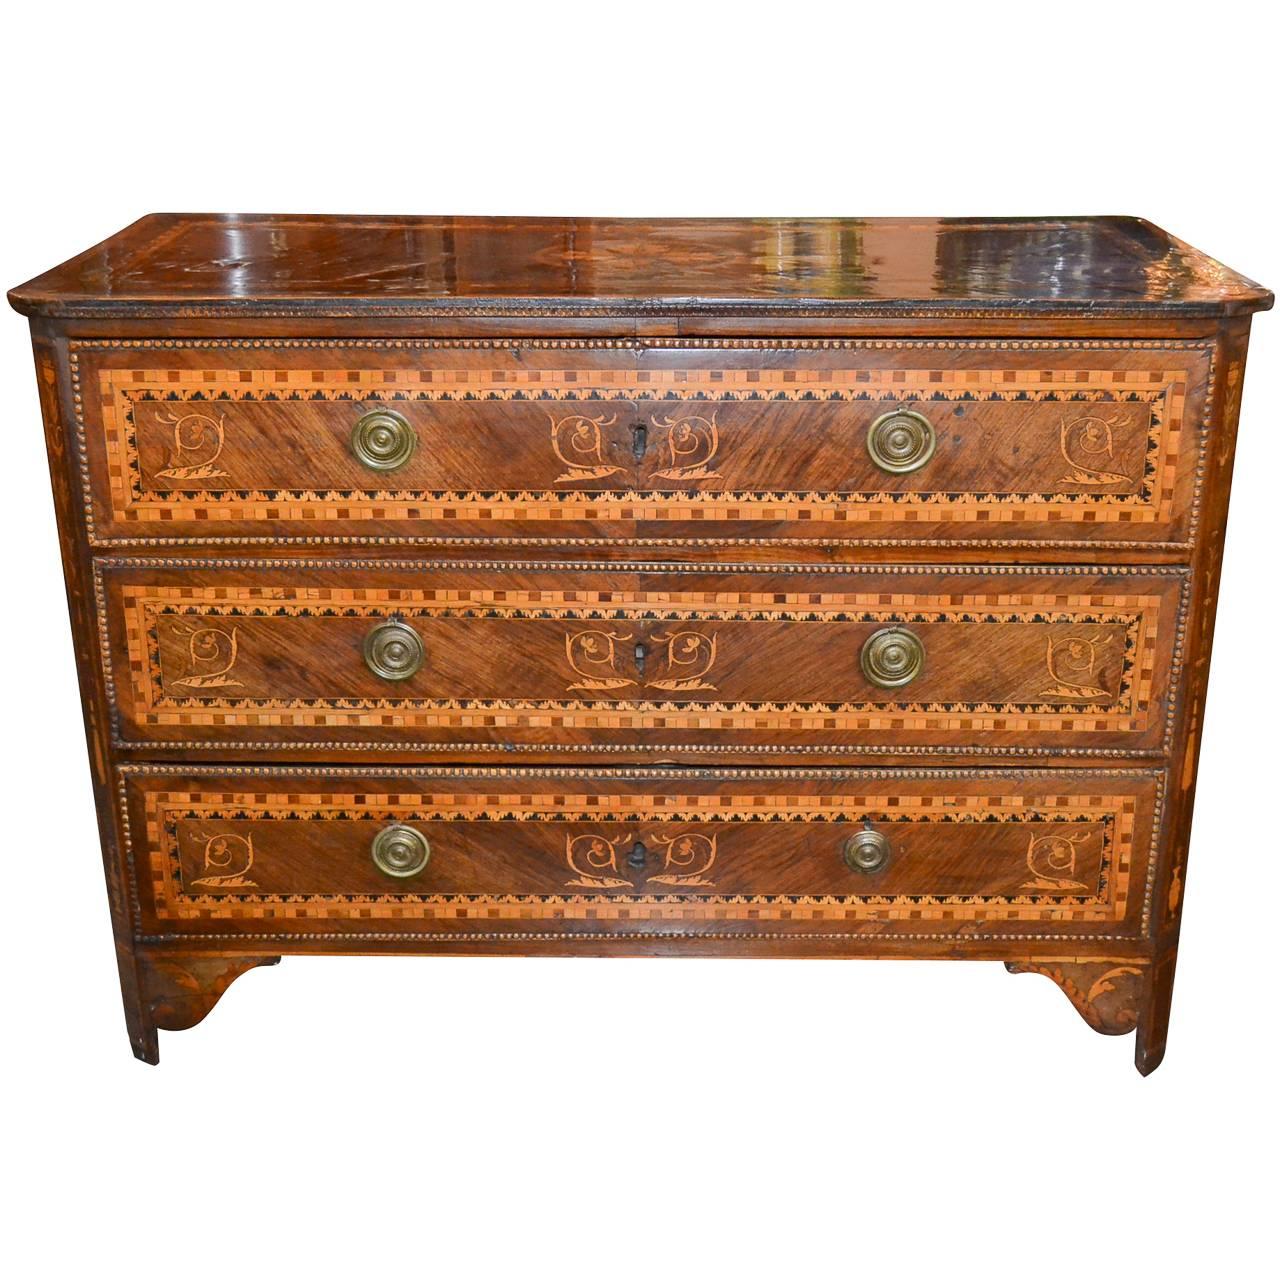 Exceptional 18th Century Italian Marquetry Commode